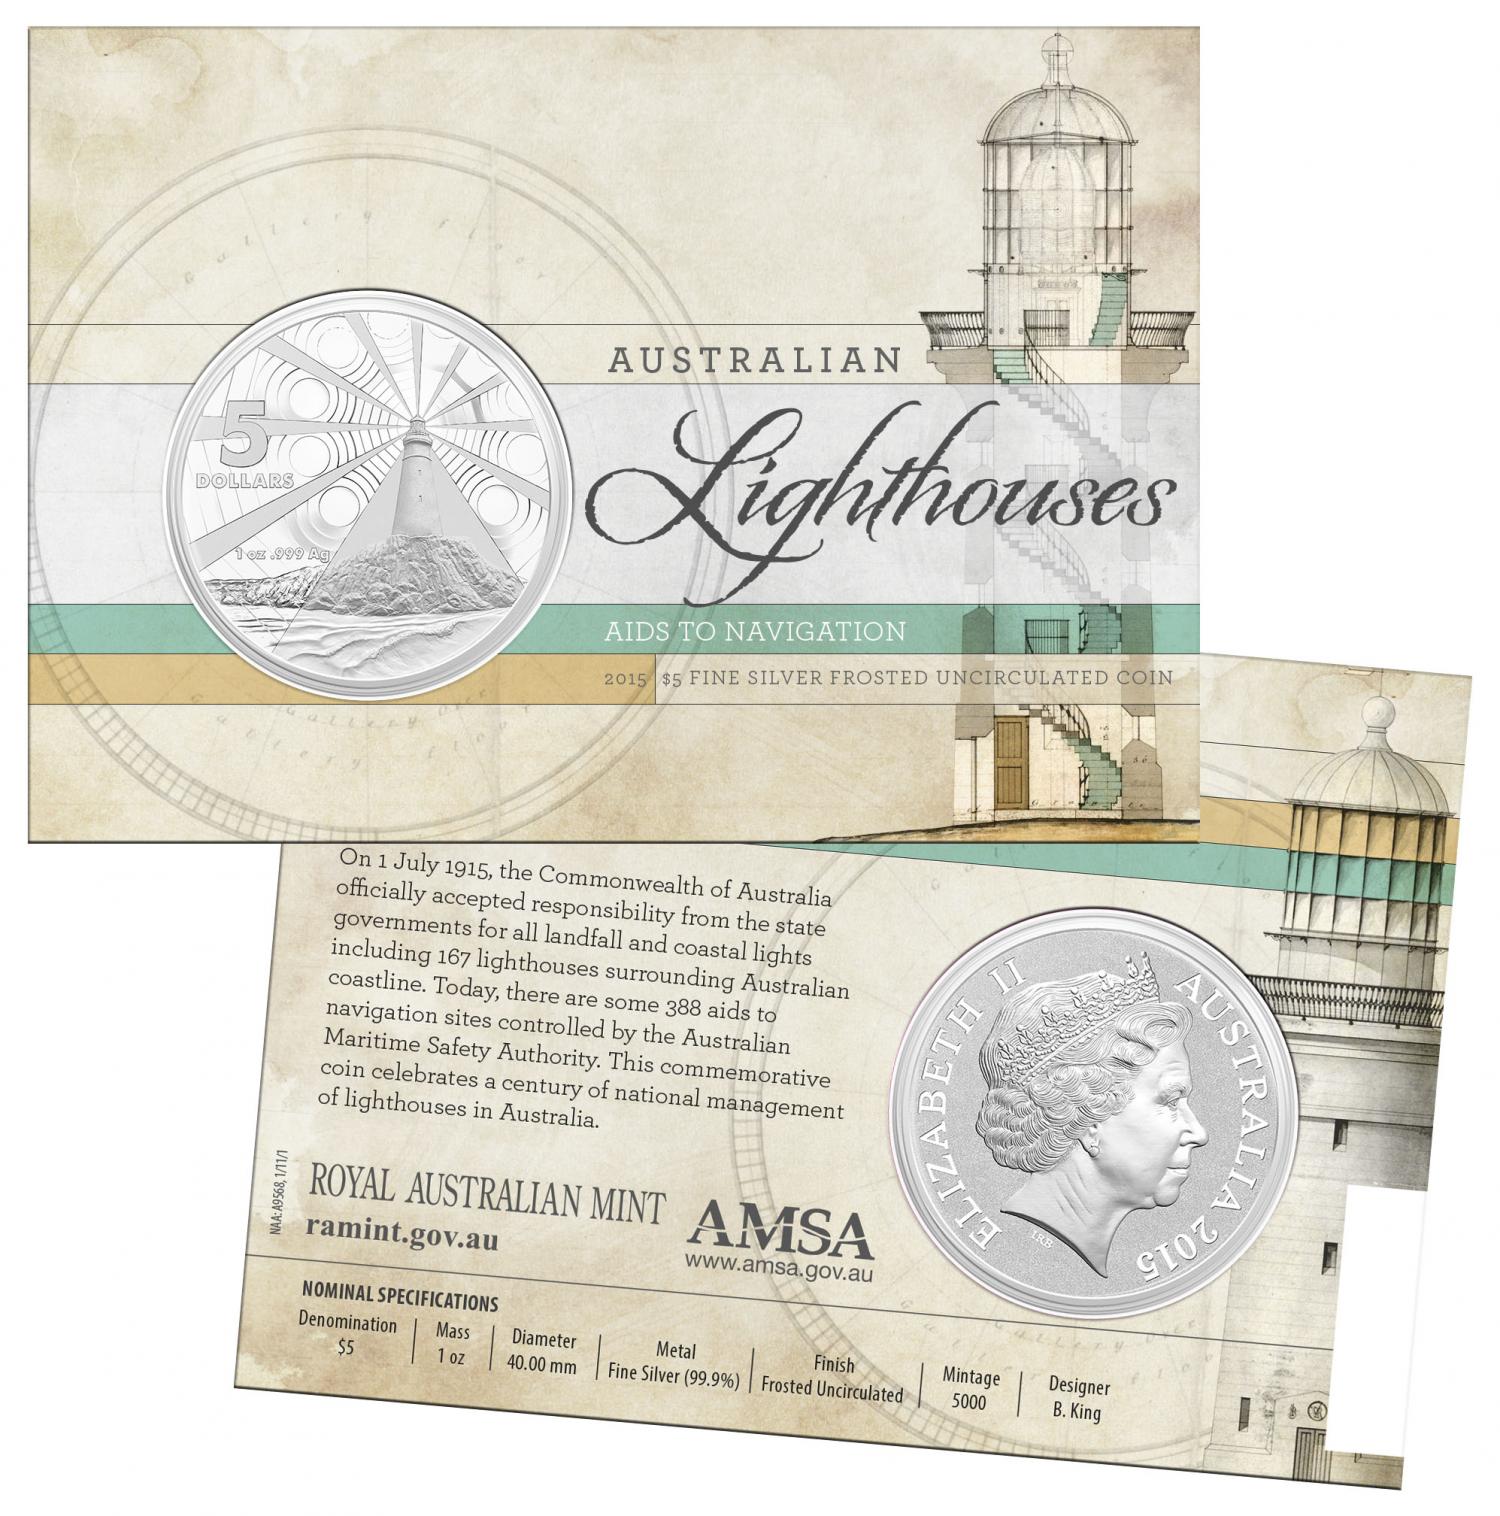 Thumbnail for 2015 Australian Lighthouses $5.00 Frosted Uncirculated Coin